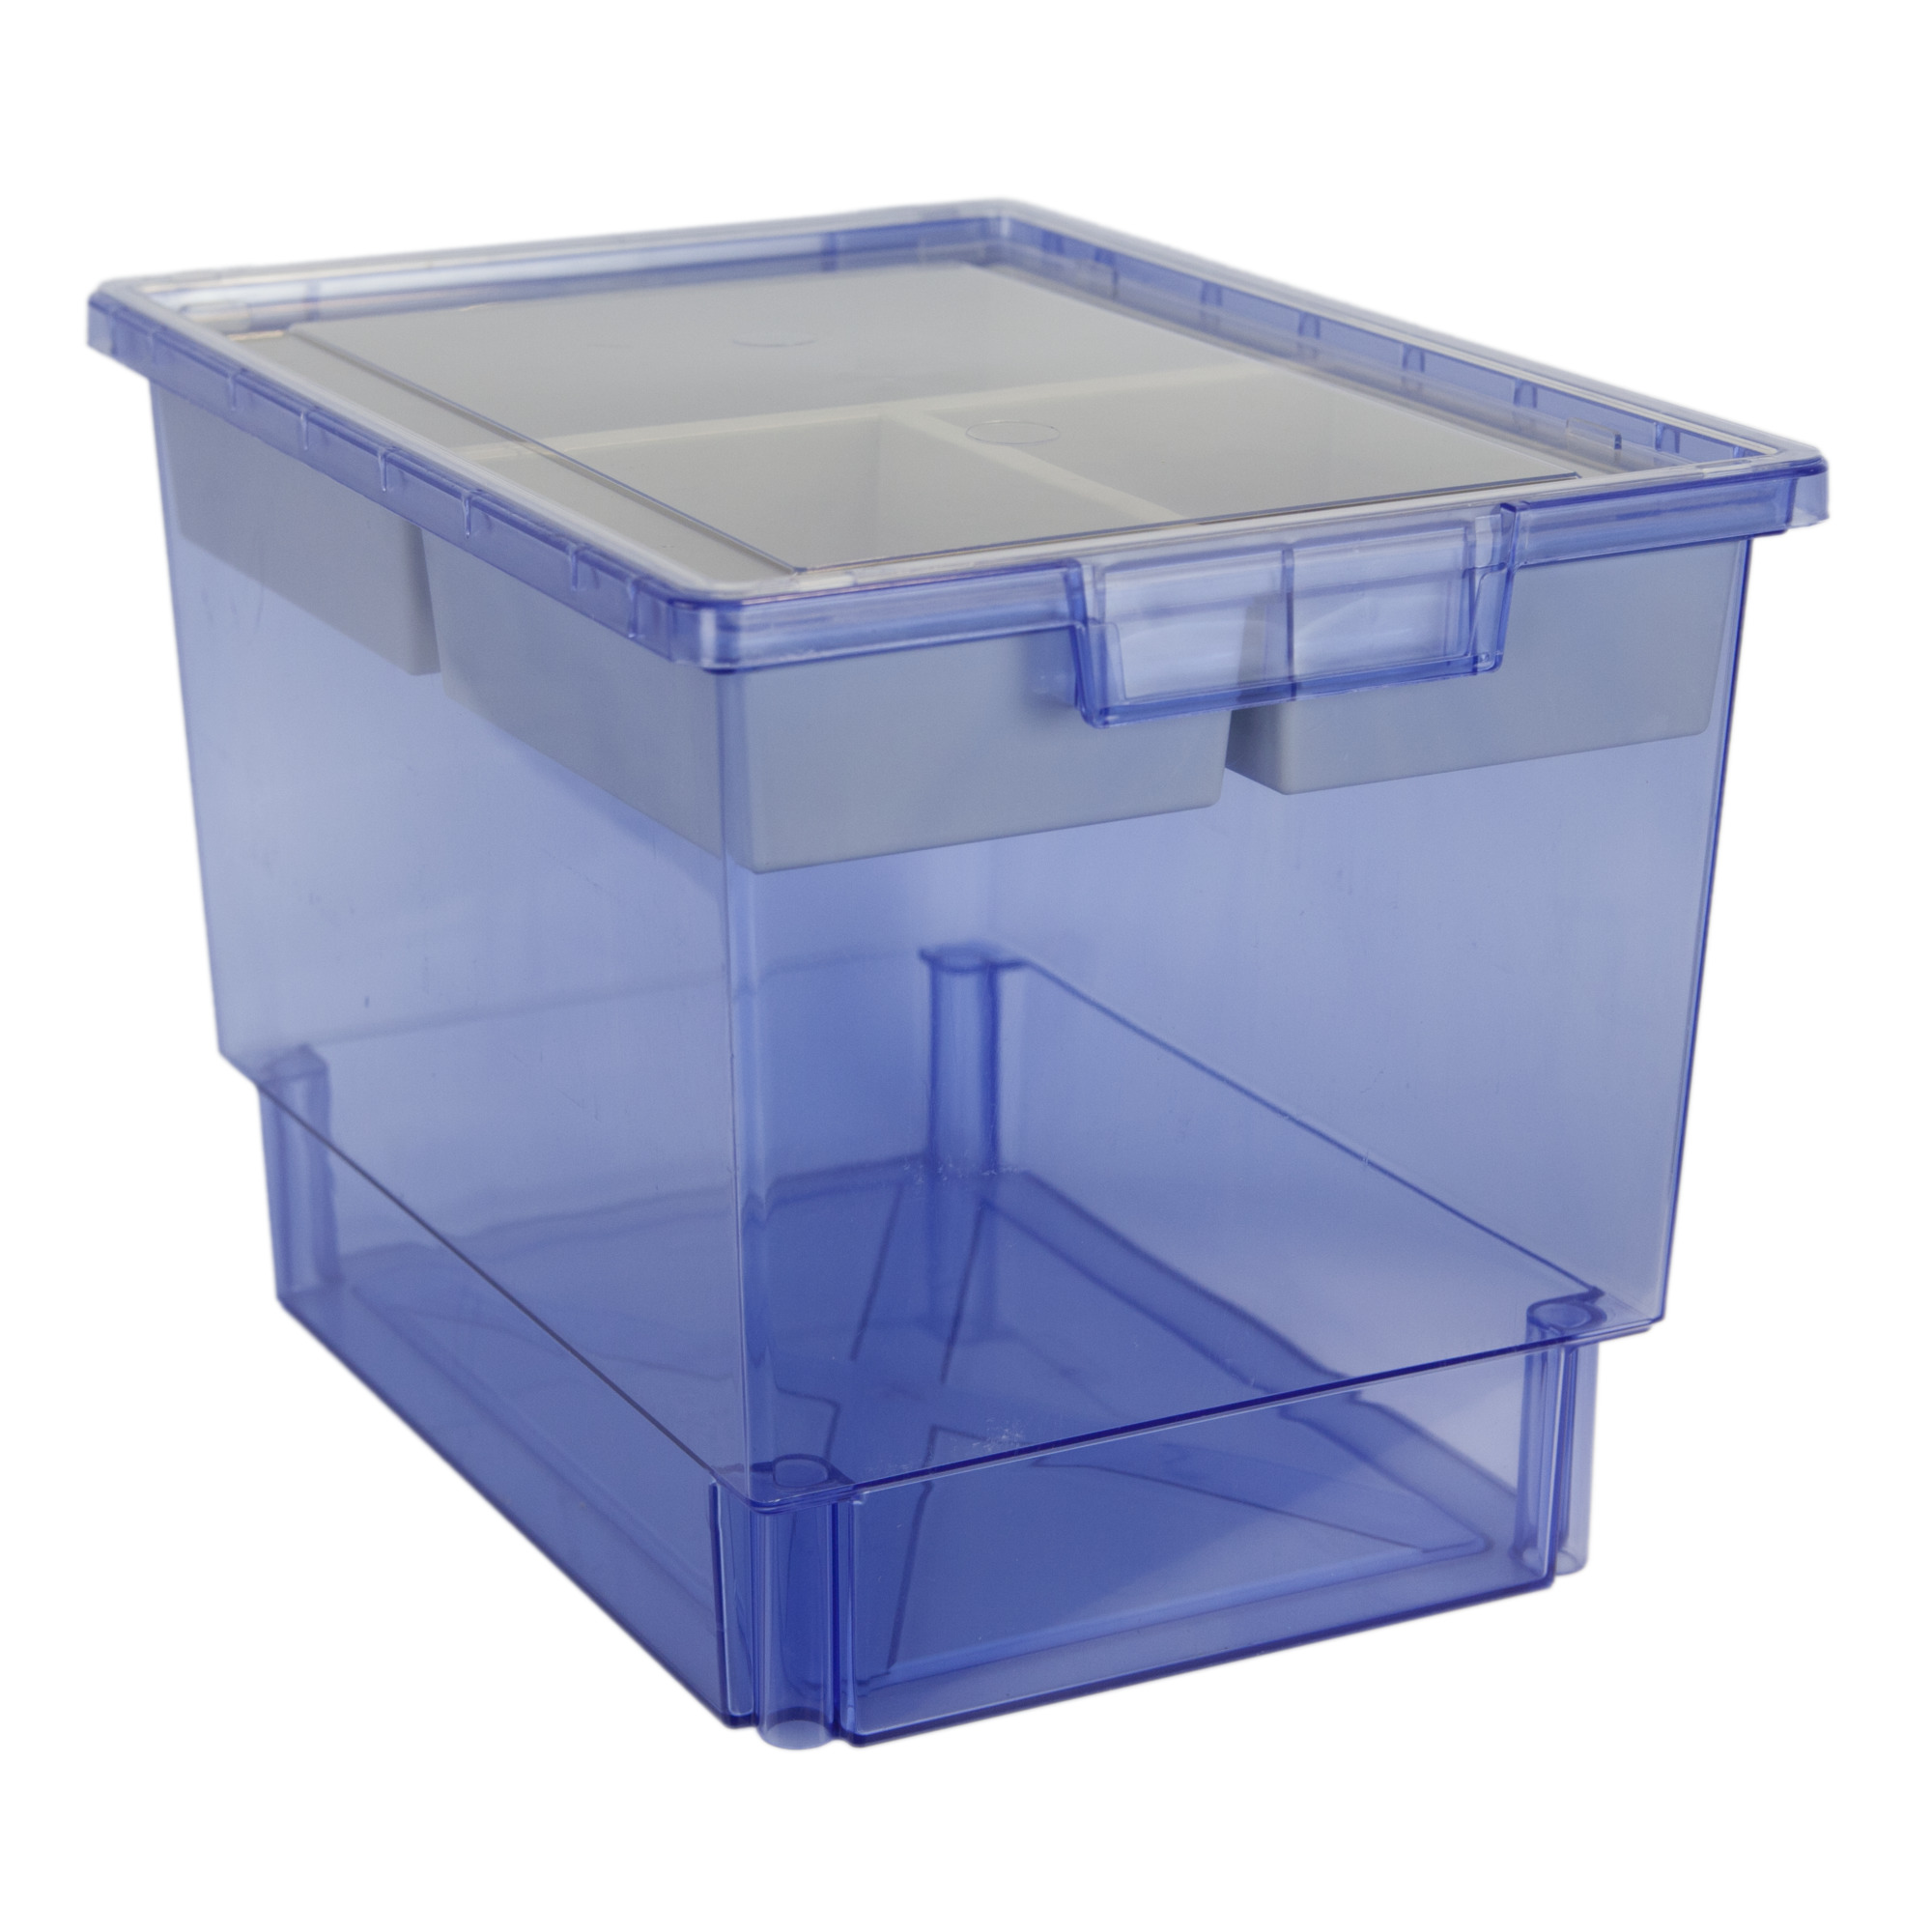 StorWerks, SlimLine 12Inch Tray Kit (3 x Inserts) Blue Tint-3PK, Included (qty.) 3, Material Plastic, Height 12 in, Model - Certwood CE1954TB-NK0004-3